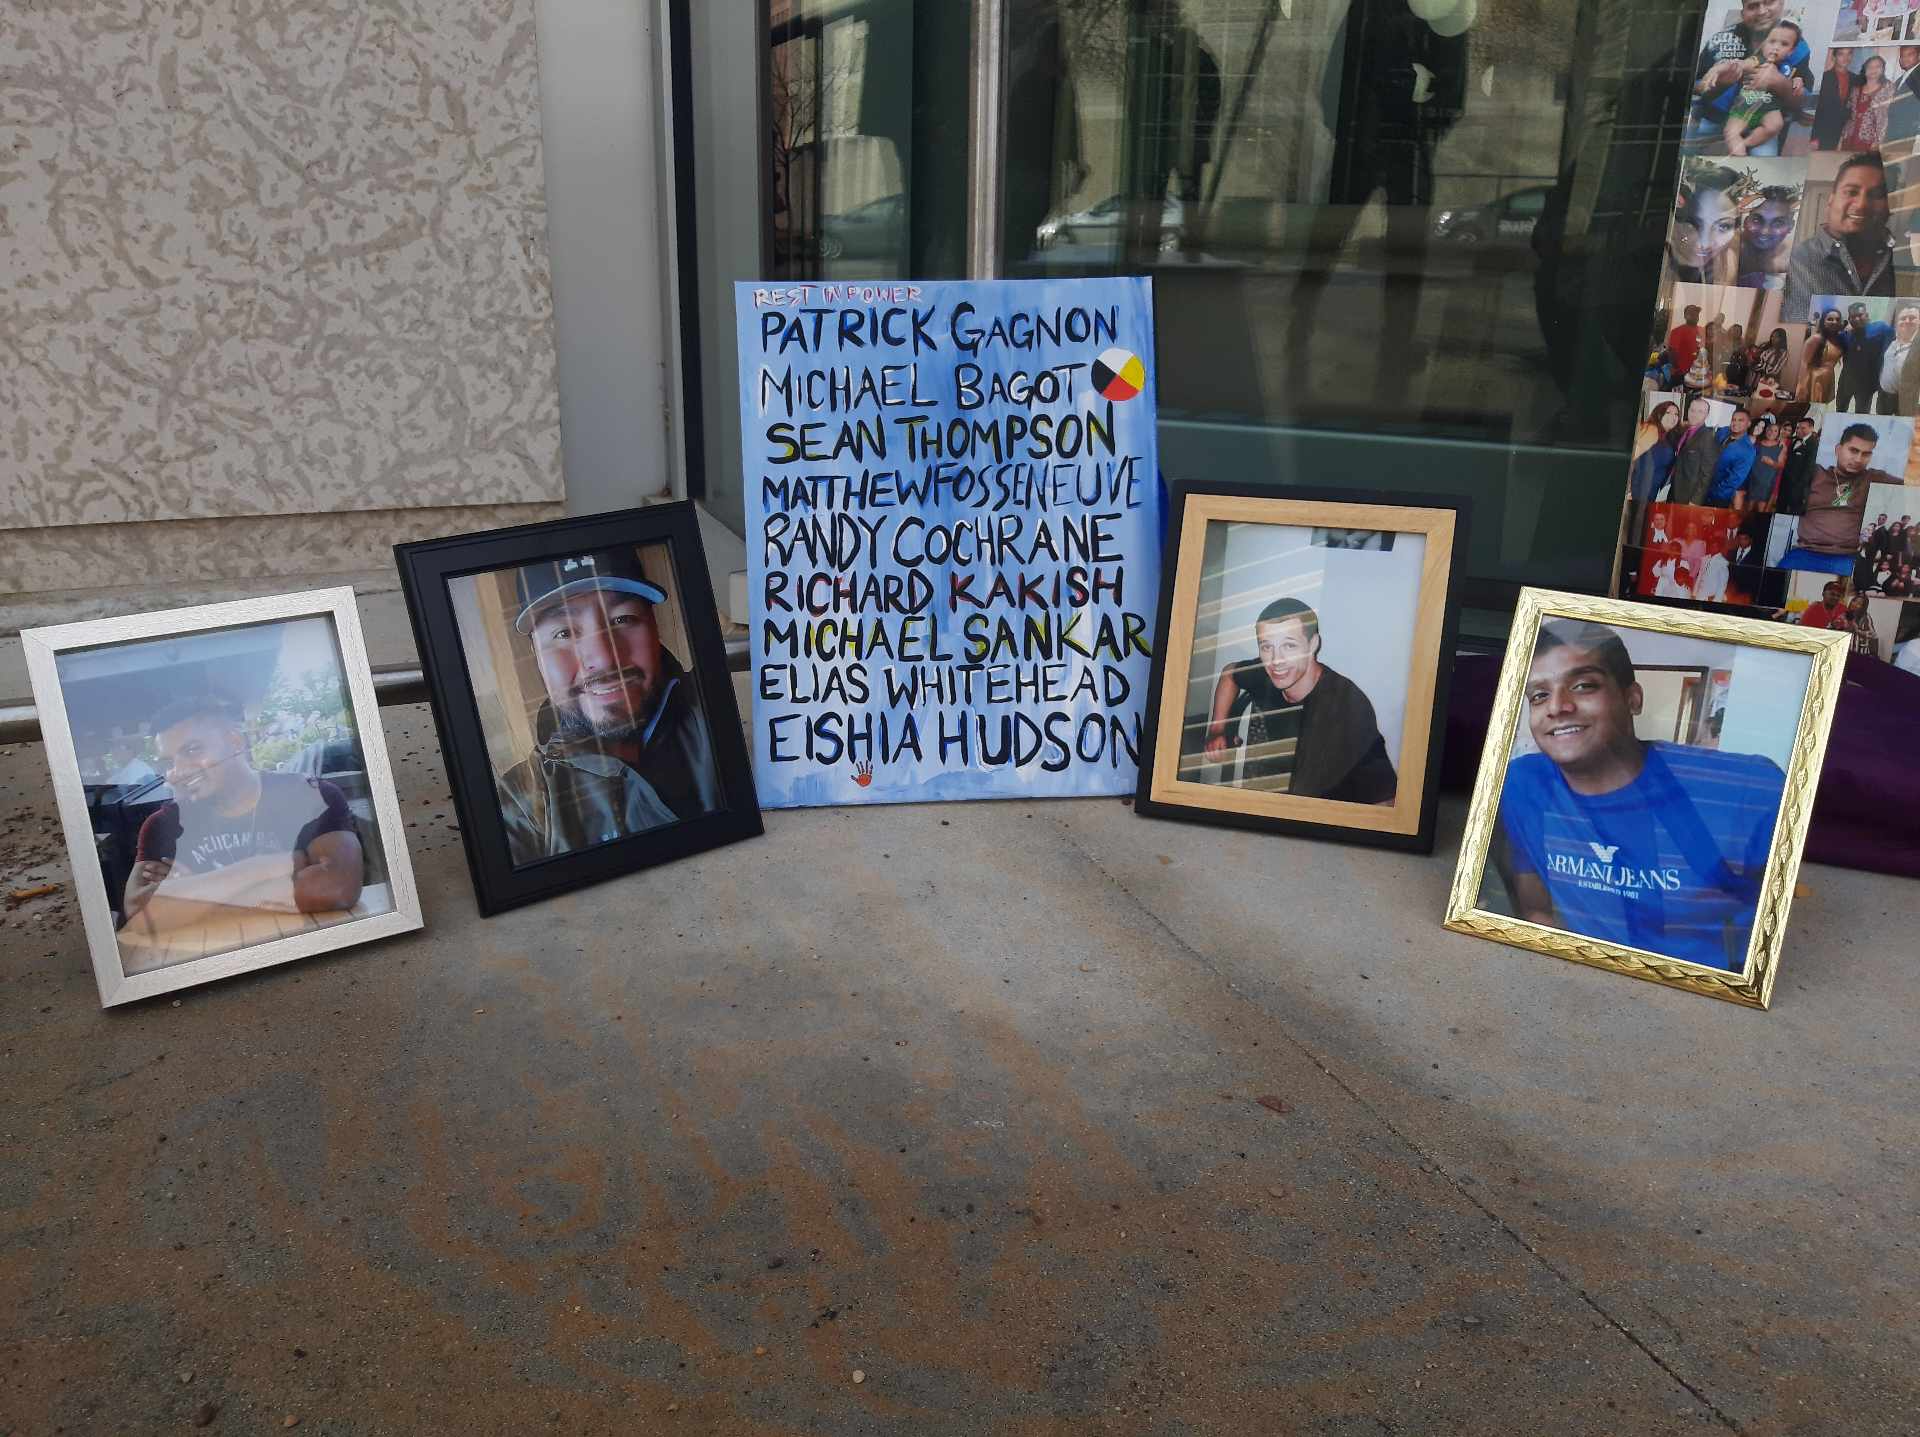 Photo of painting with nine people’s names who were killed by police, next to photos of Michael Bagot, Elias Whitehead, Richard Kakish and Michael Sankar